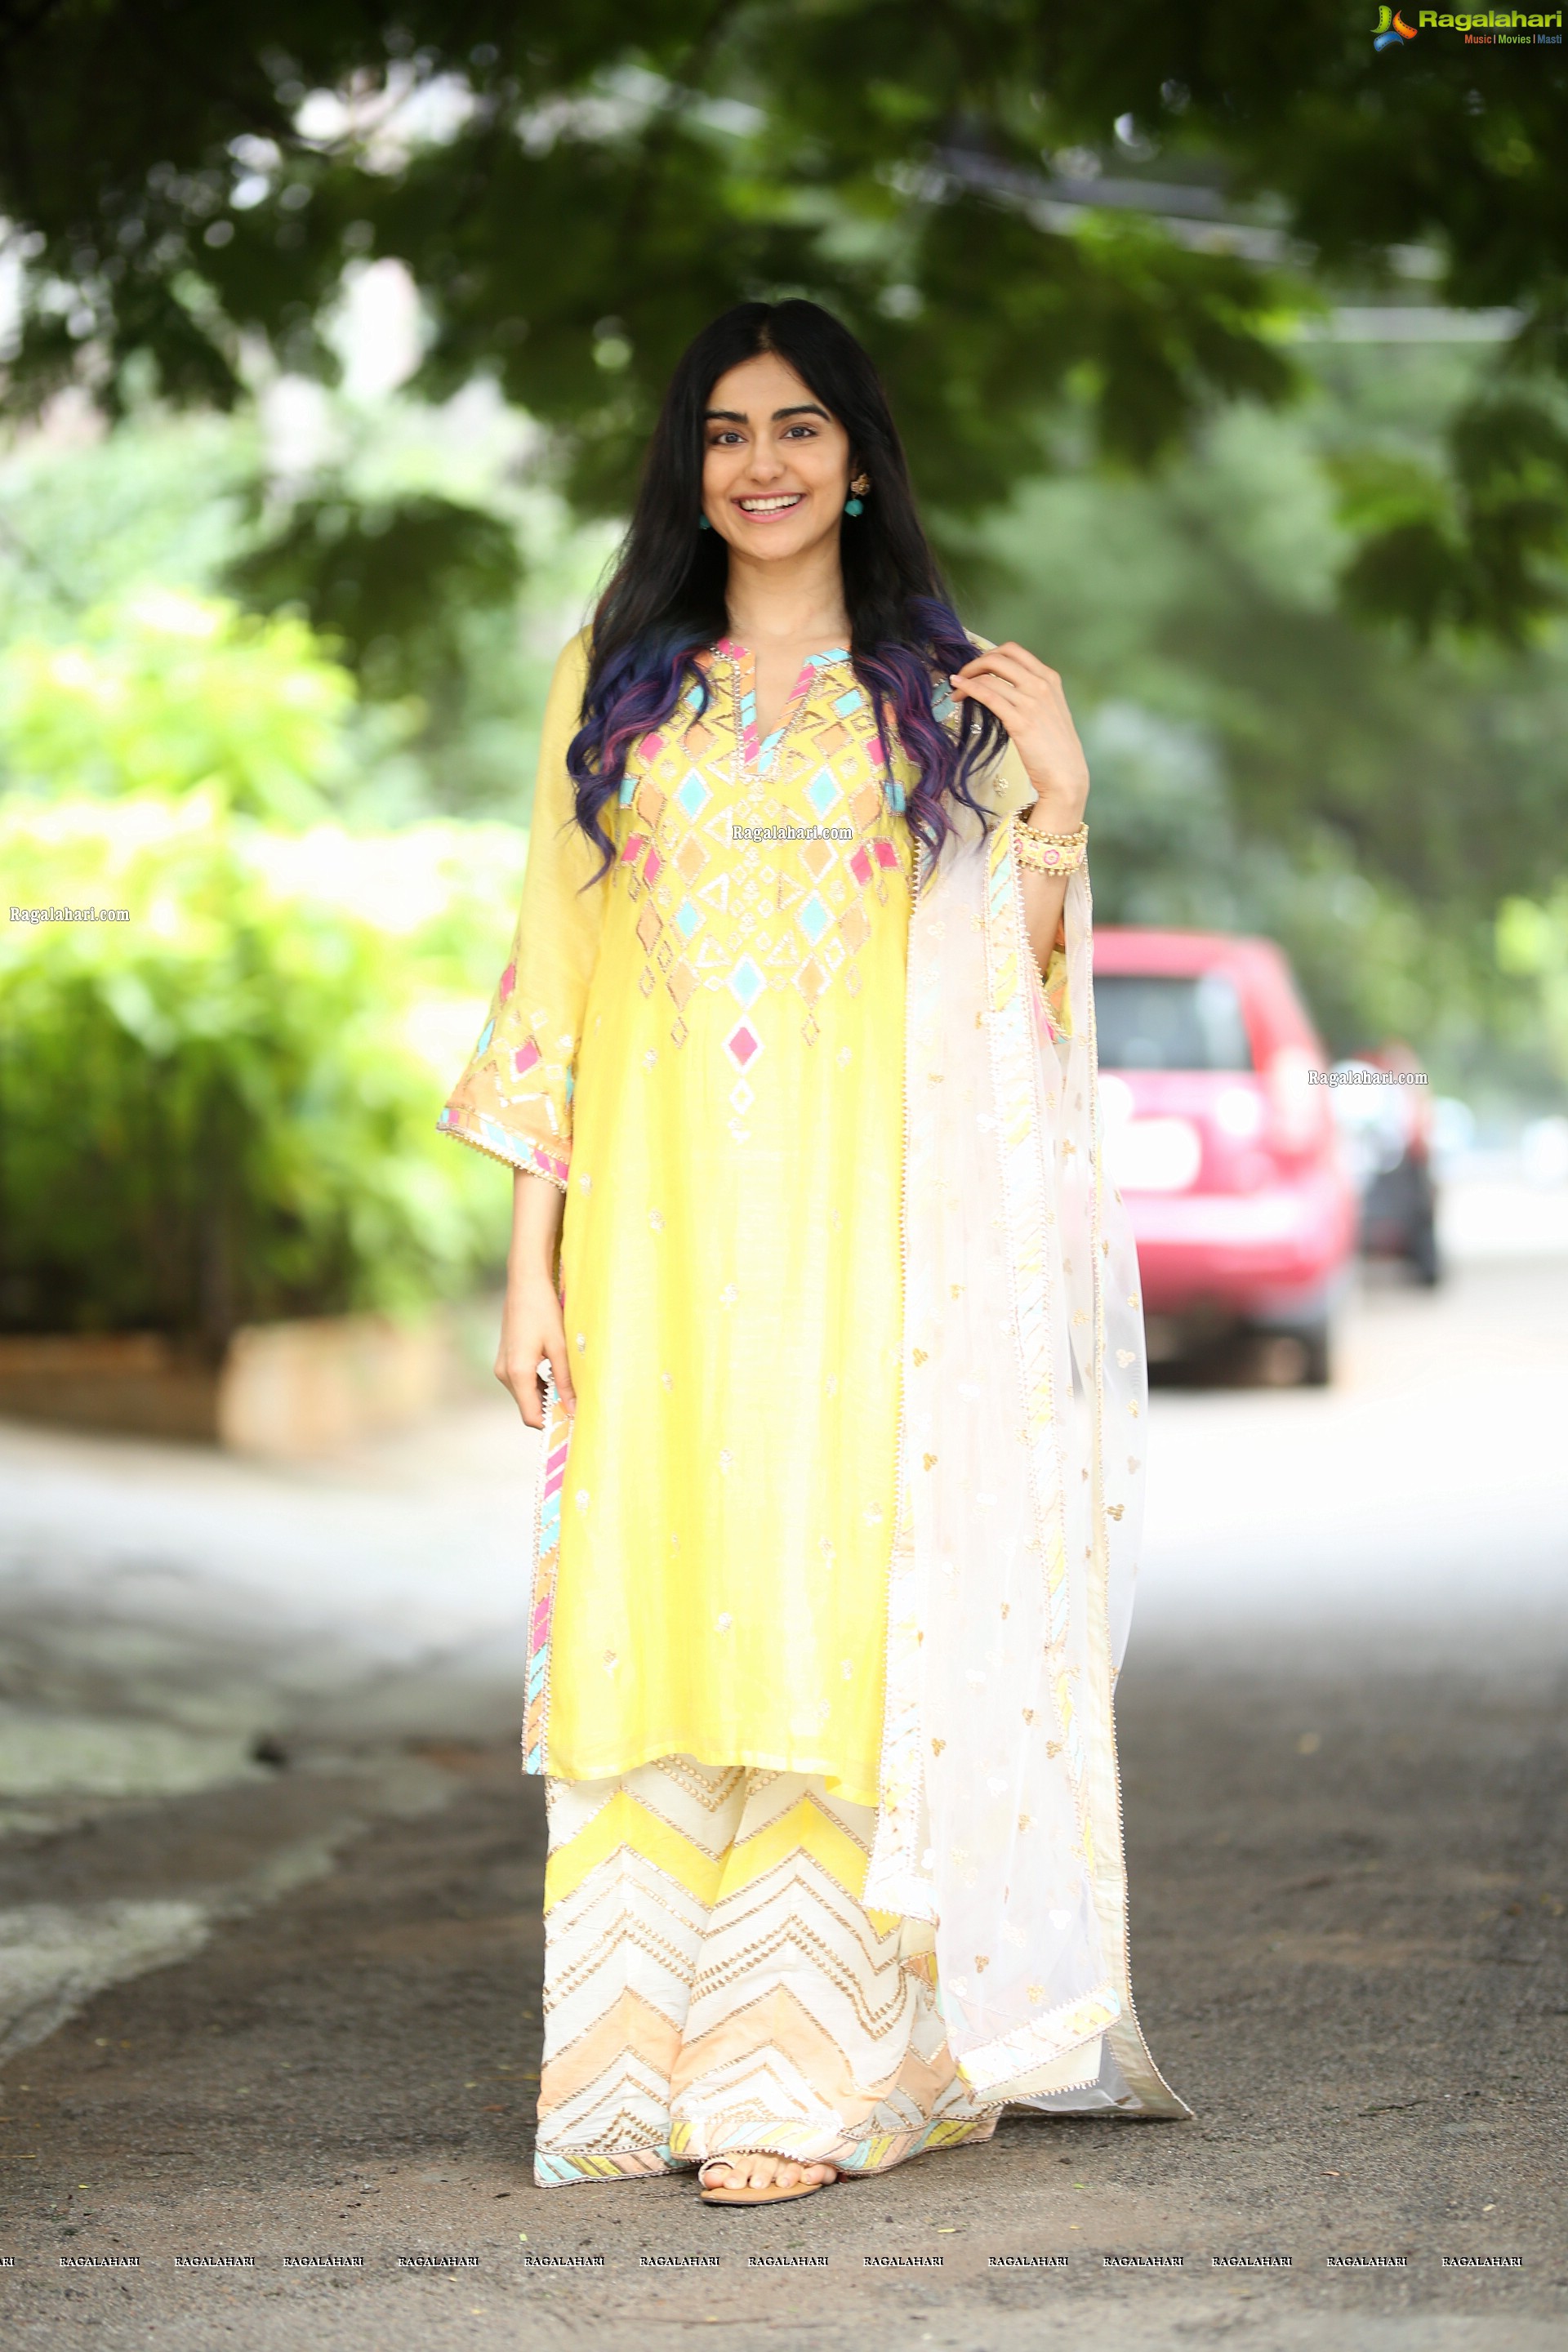 Adah Sharma at Question Mark Movie First Look Poster Launch Event